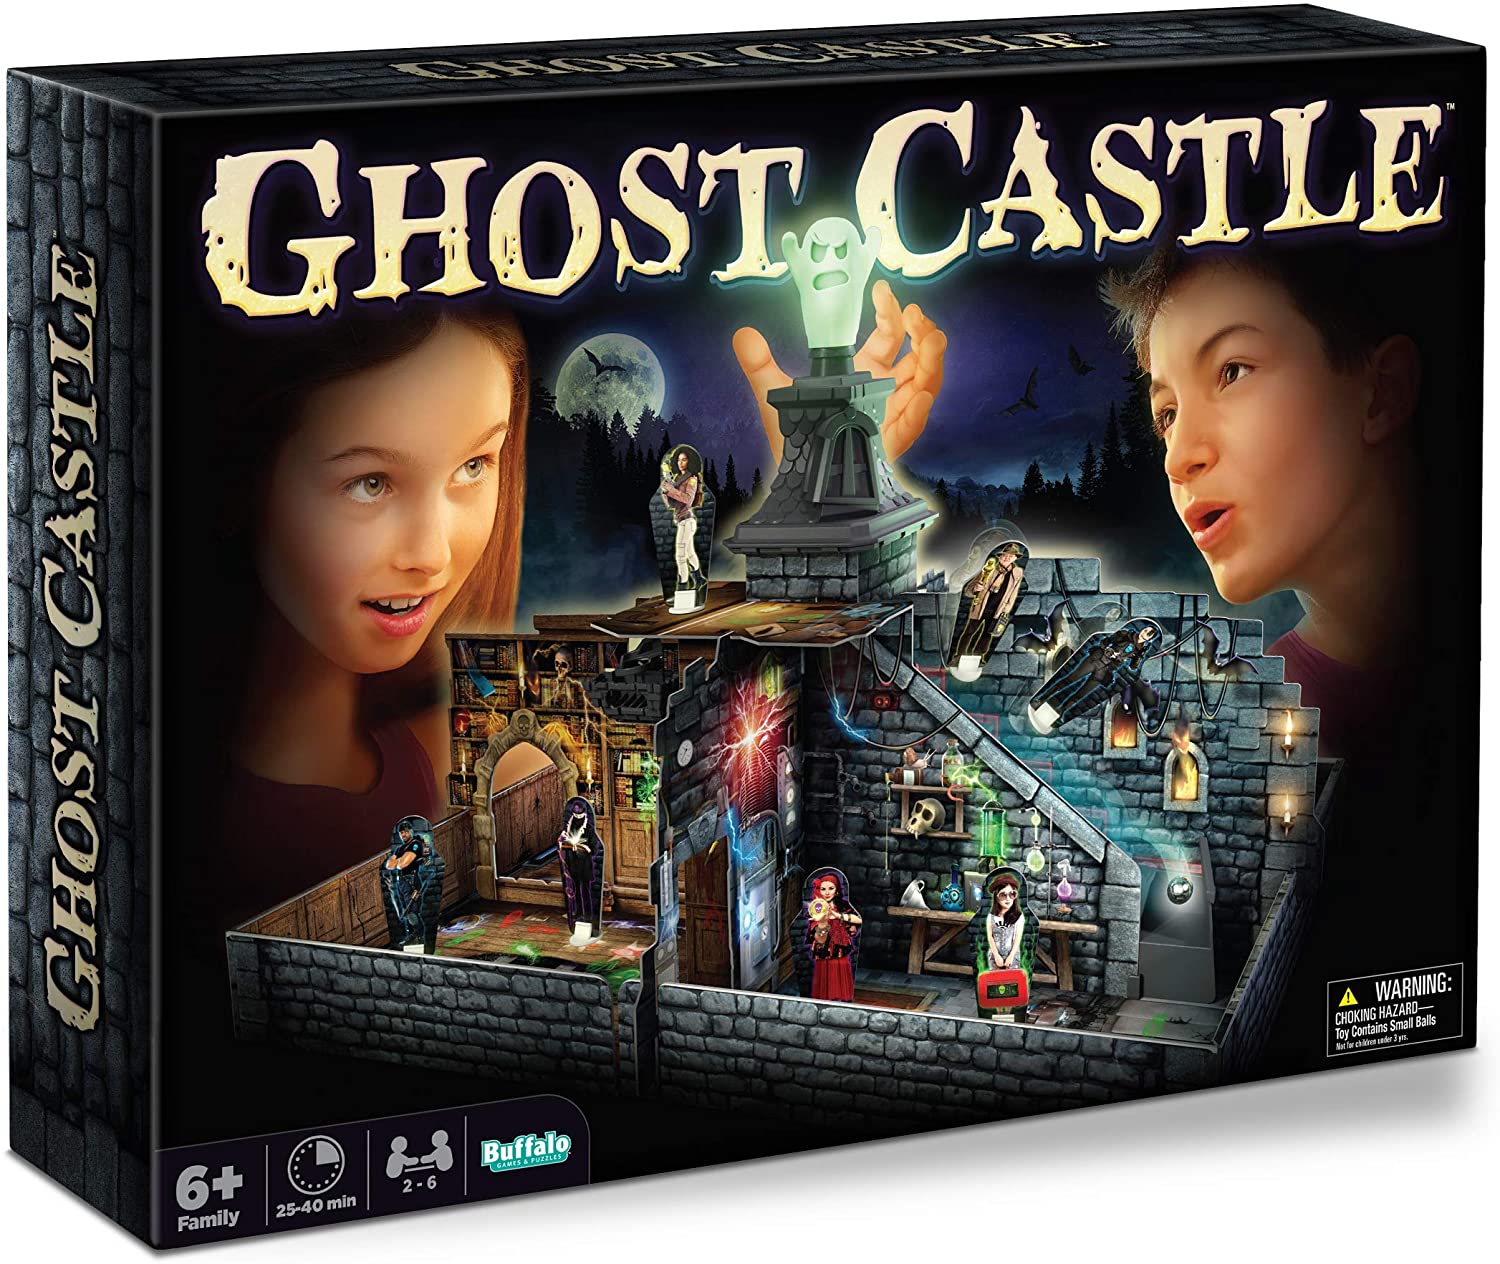 Buffalo Games Escape from Ghost Castle Game $7.49 + FS w/ Amazon Prime or FS on $25+